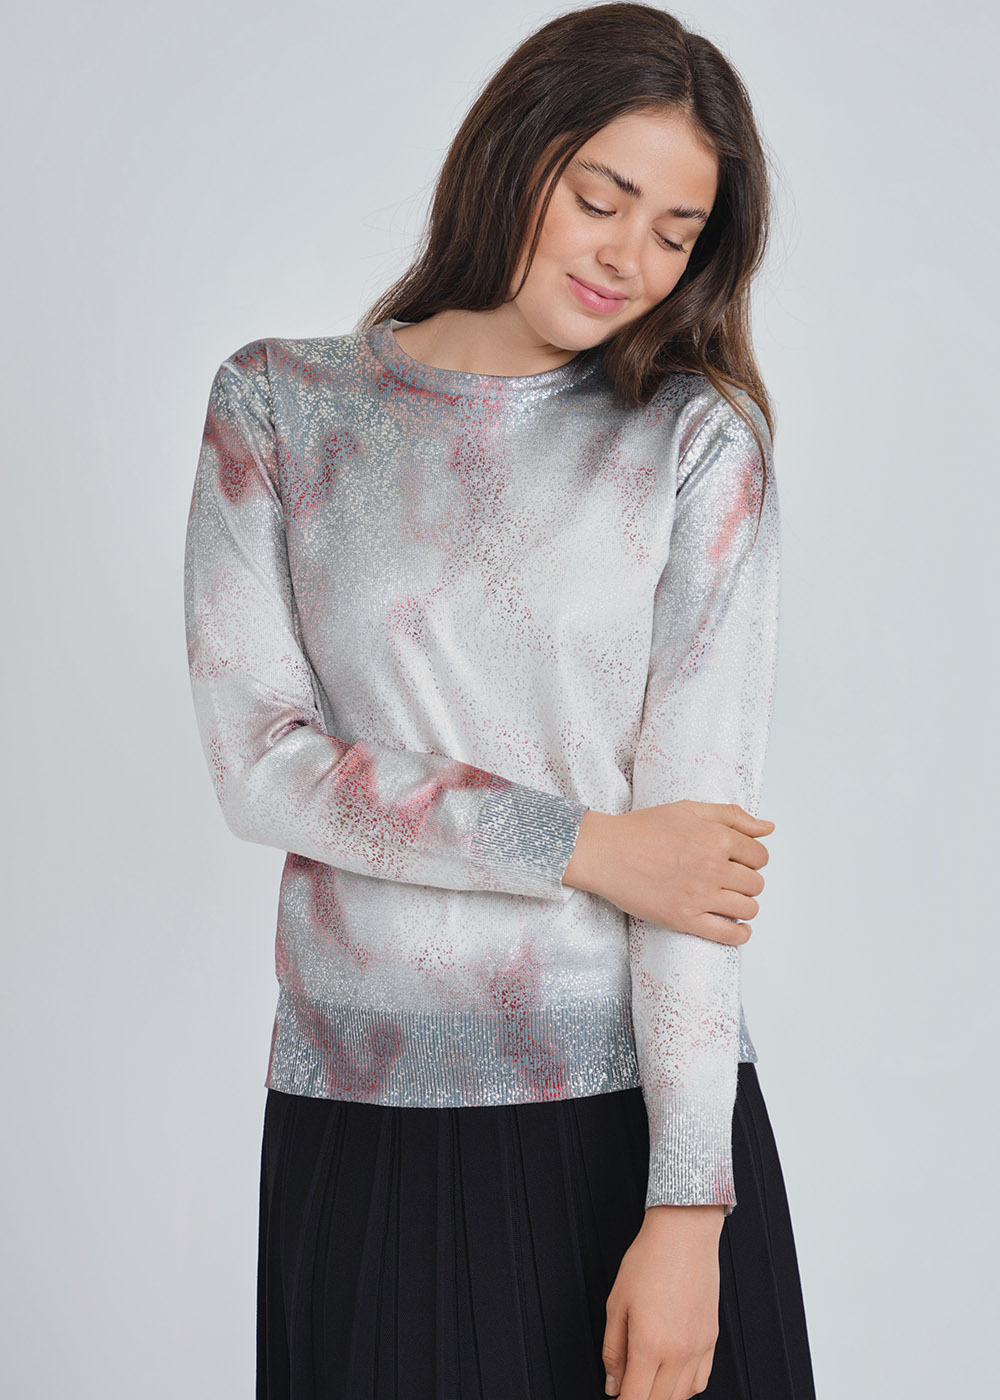 Pattern Play: White Abstract Sweater